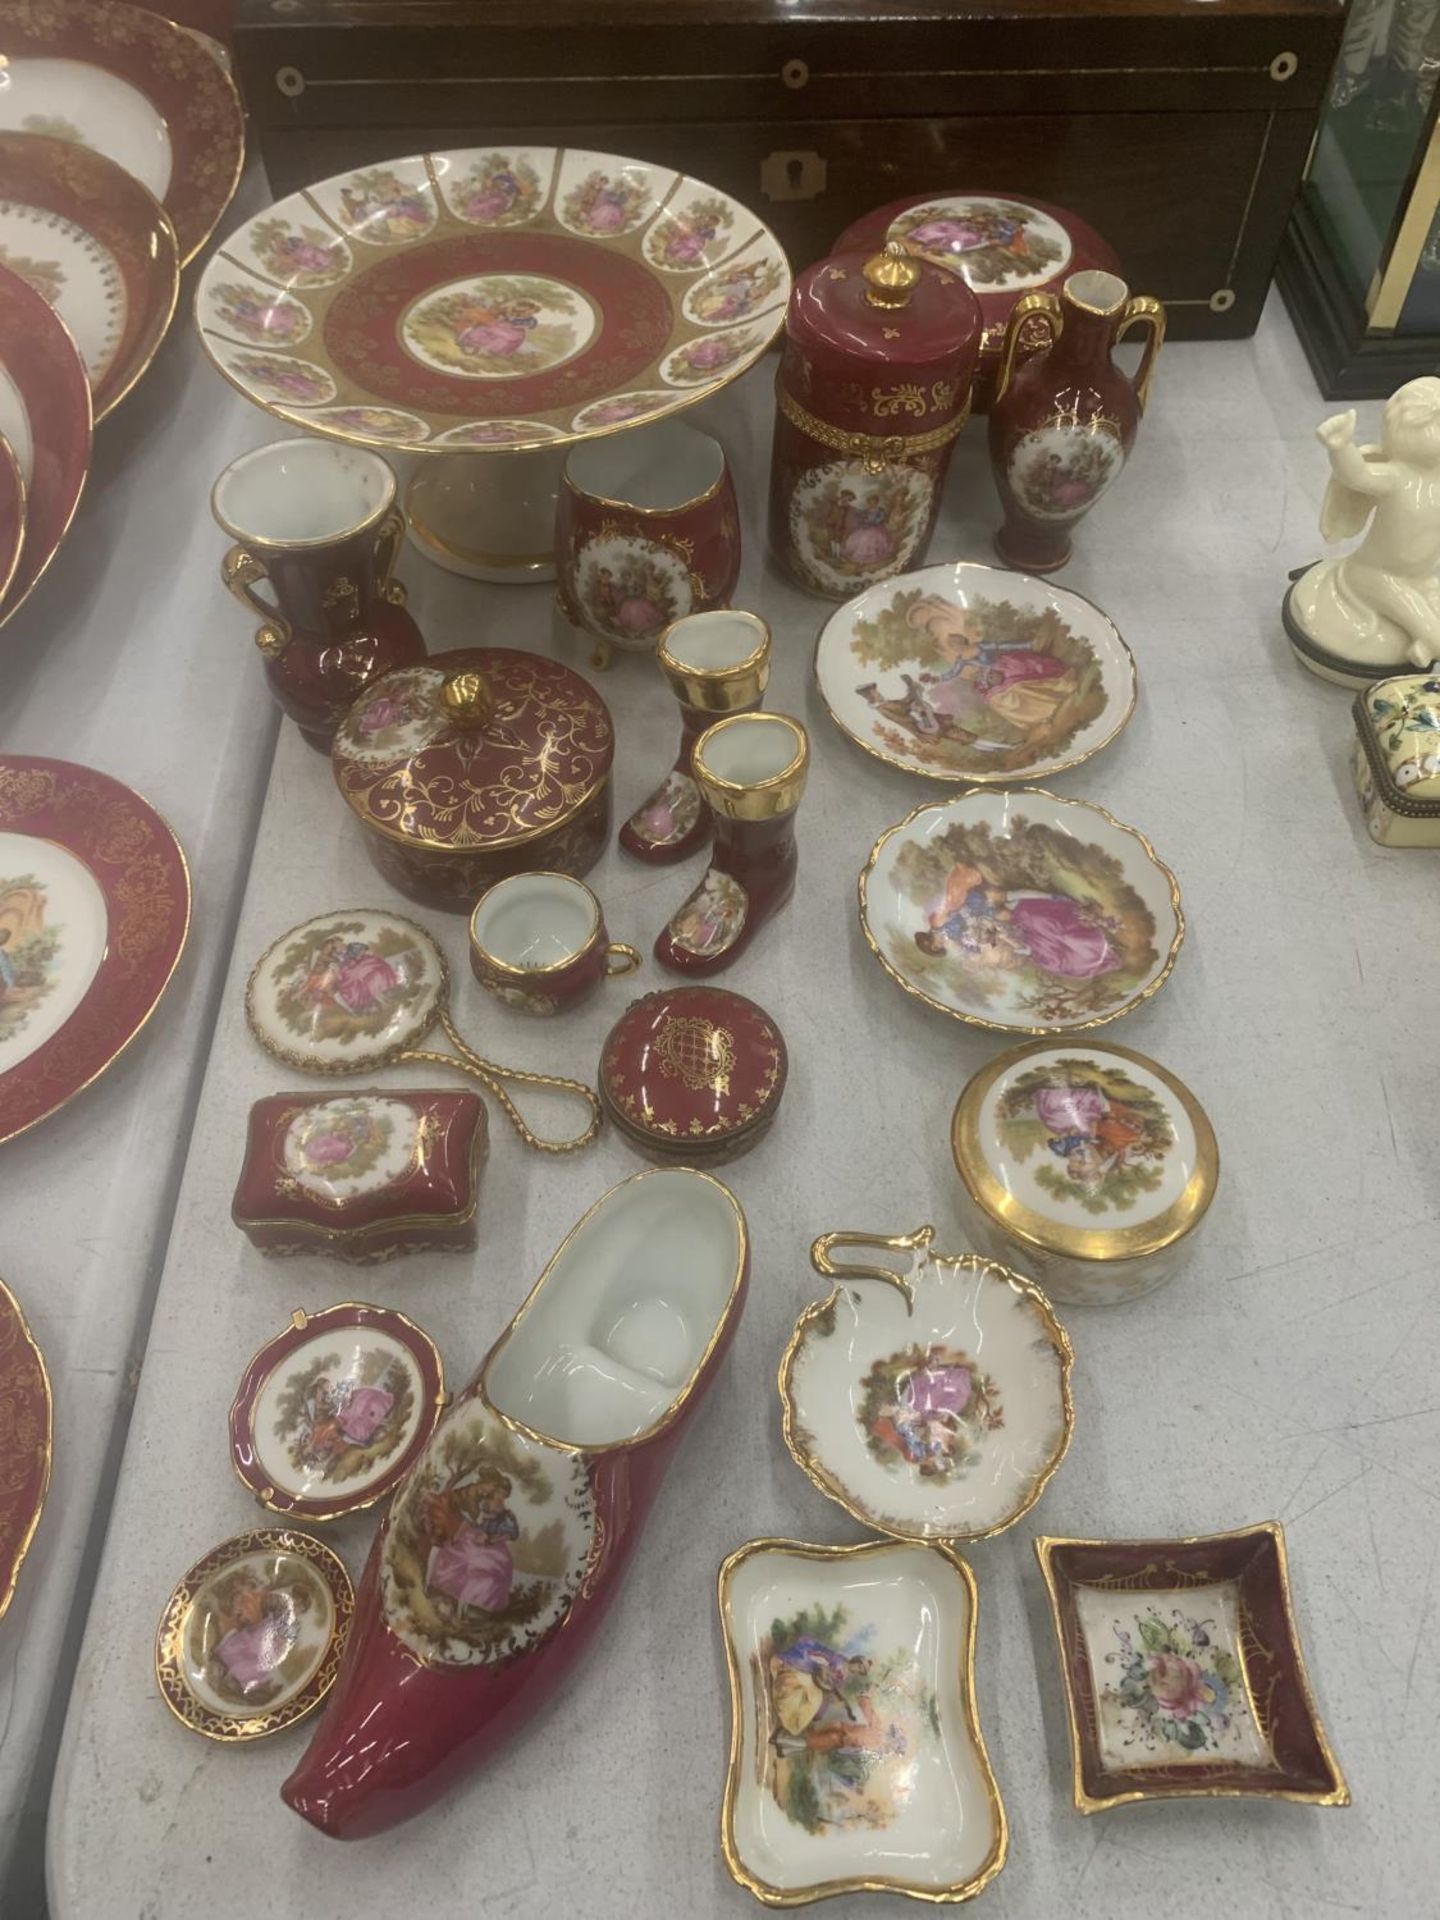 A LARGE QUANTITY OF LIMOGES TO INCLUDE A FOOTED CAKE PLATE, TRINKET BOXES, MINIATURE PLATES, SMALL